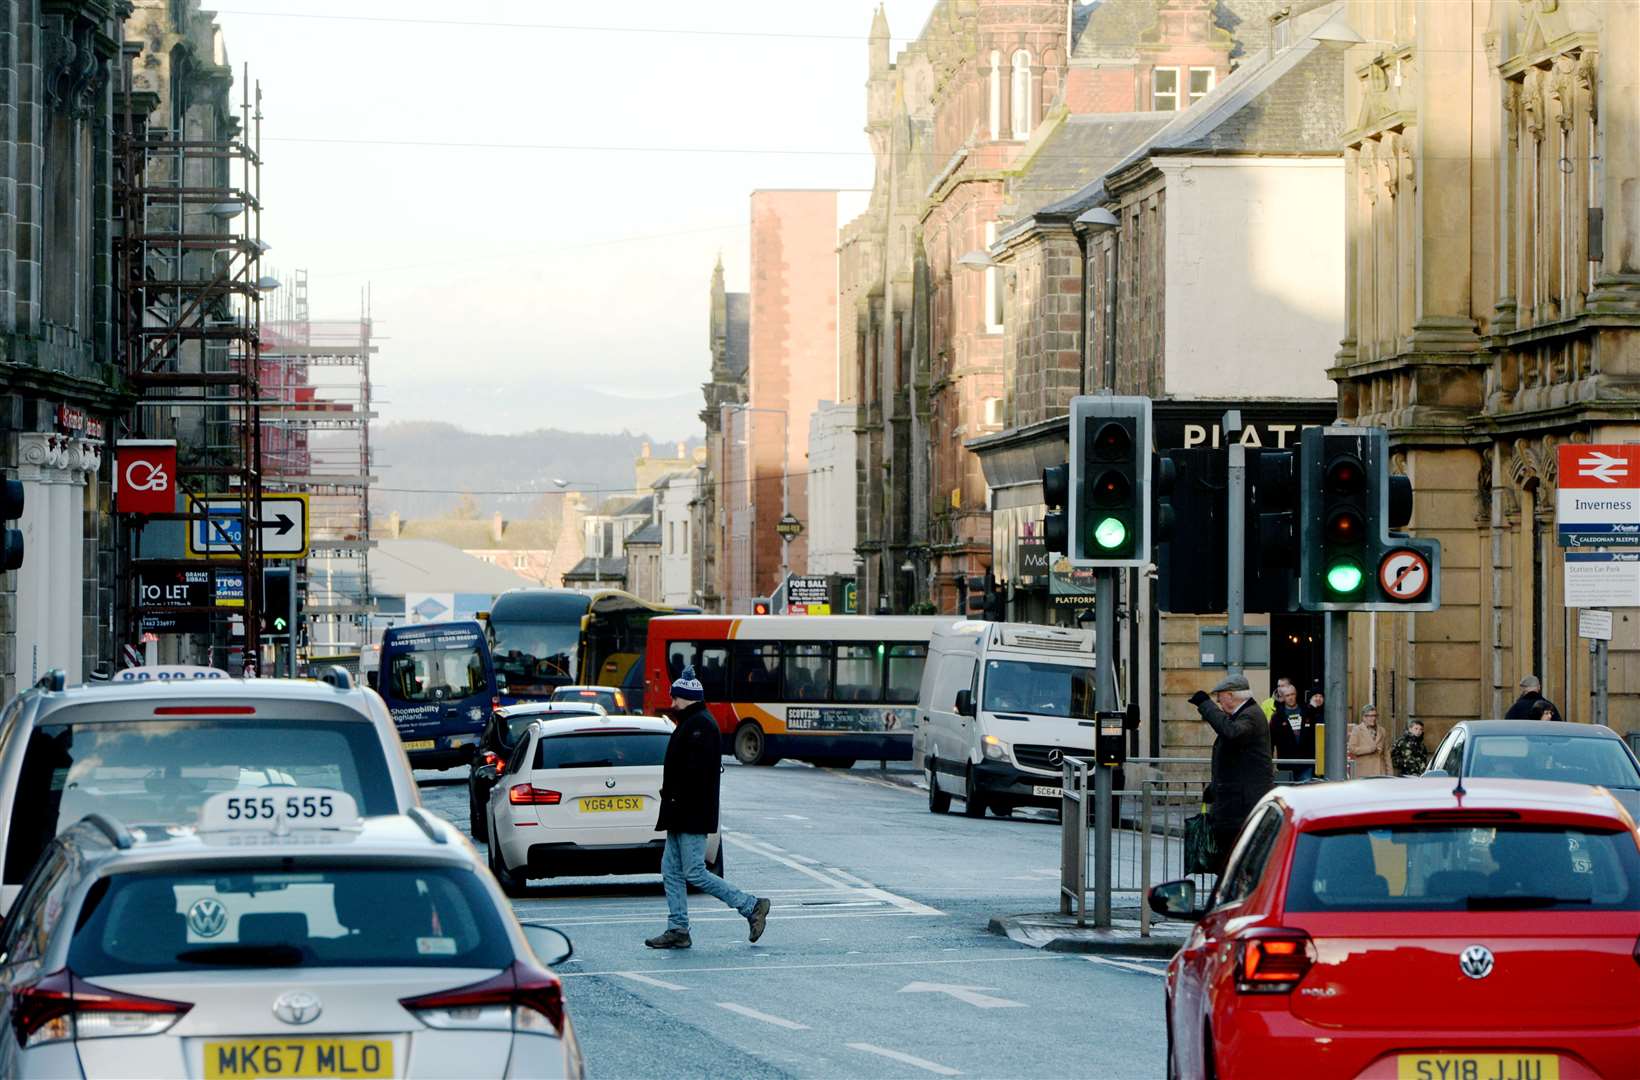 Changes to Academy Street have divided people in Inverness. Picture: James MacKenzie.